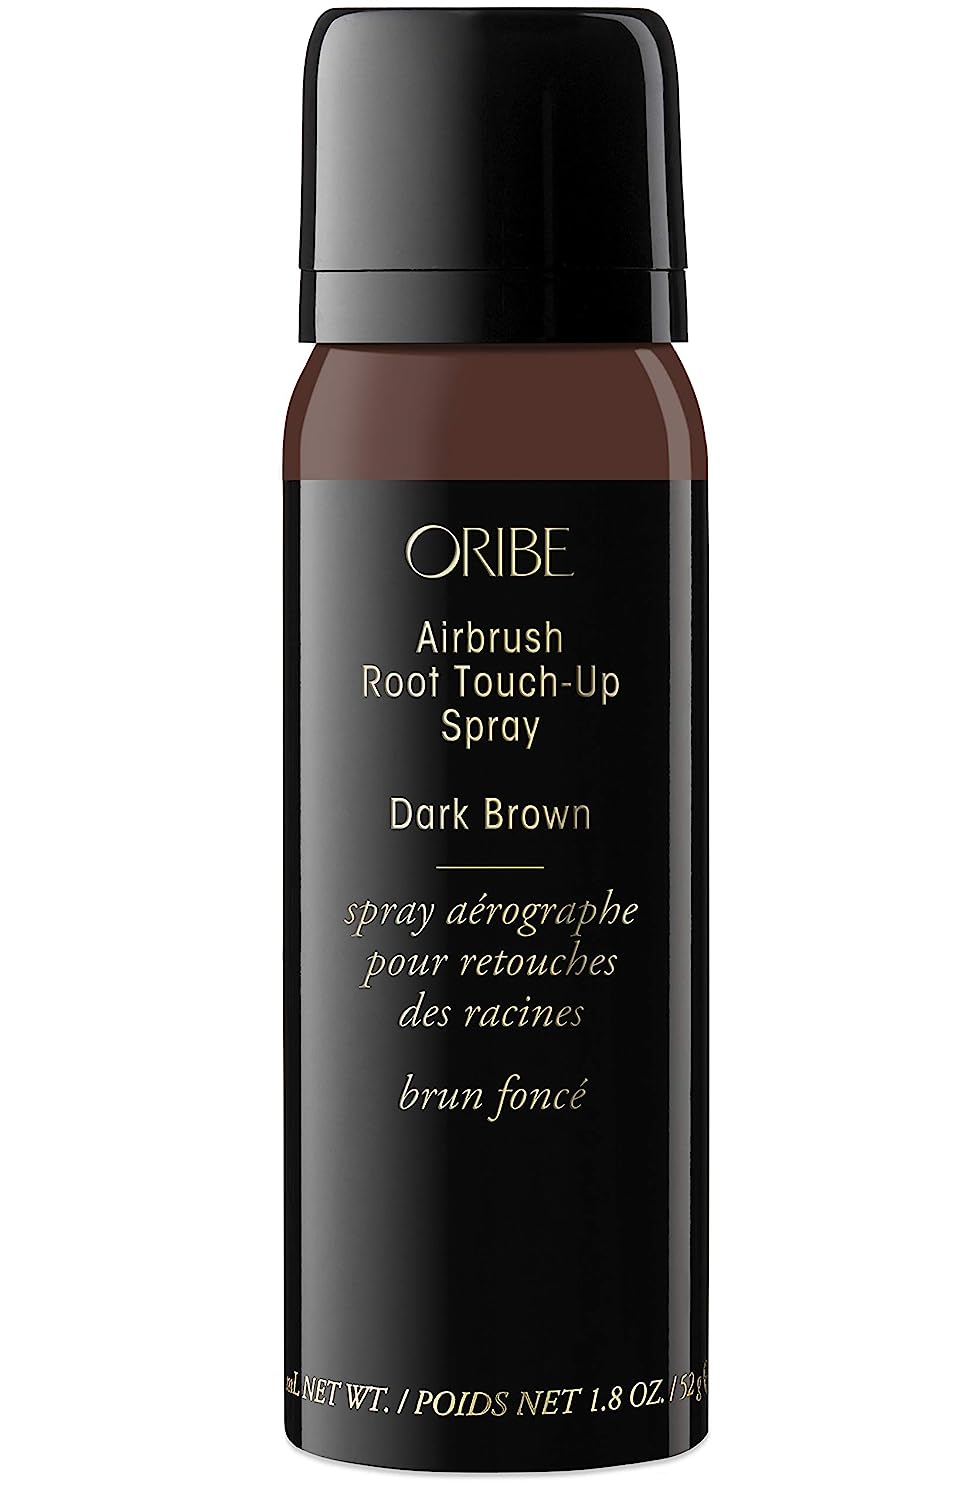 Oribe Airbrush Root Touch Up Spray